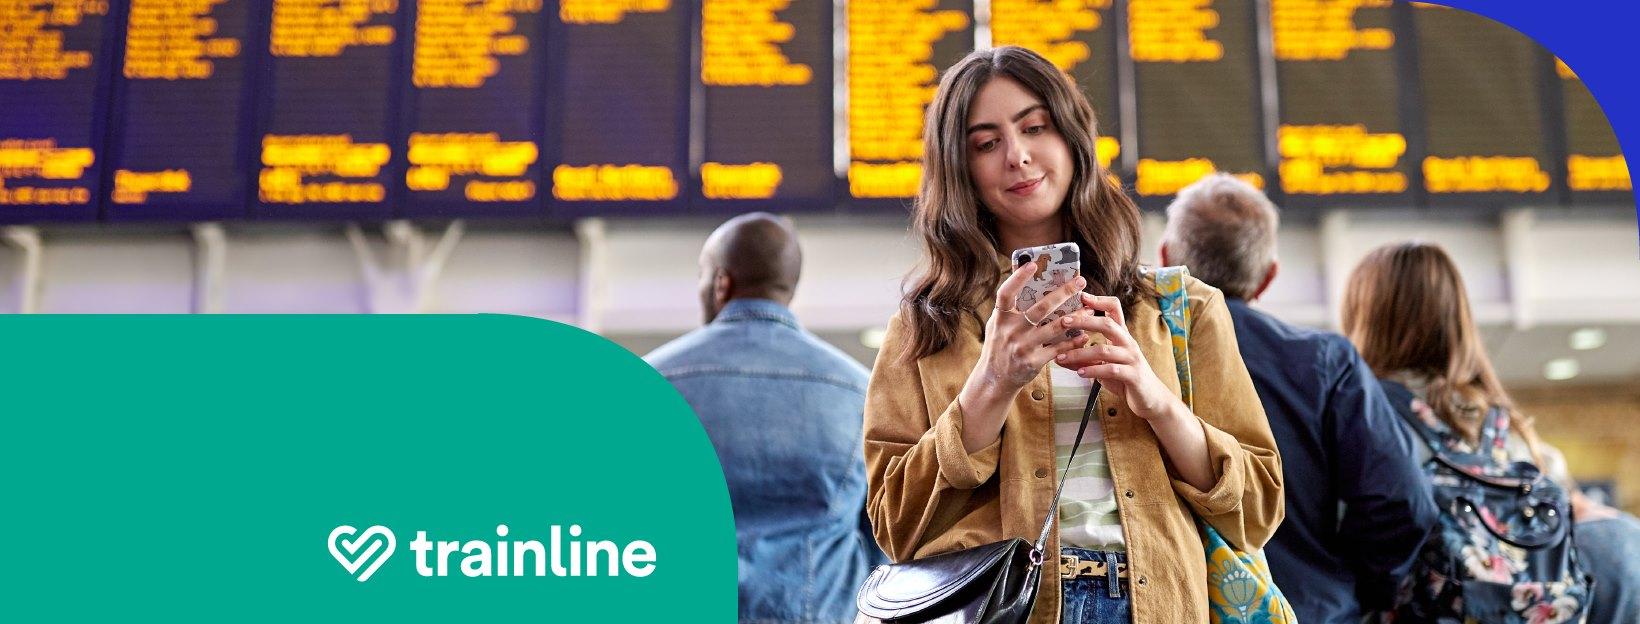 1/3 Off Train Tickets with a Student Railcard from Trainline